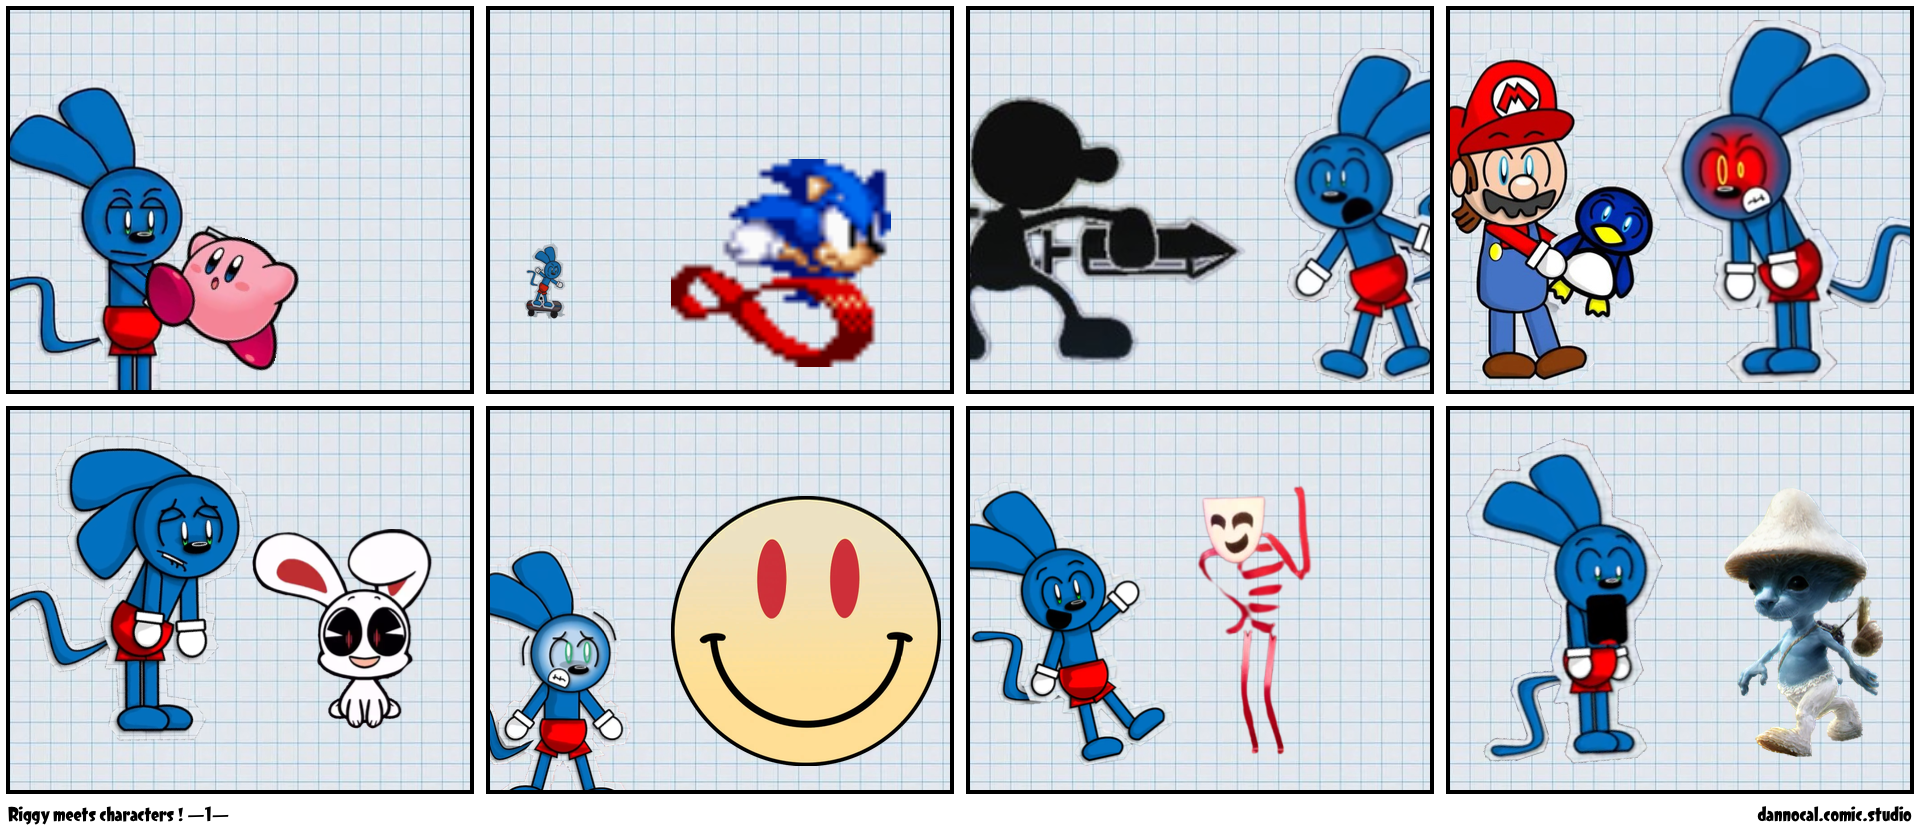 Which of the sonic sprites are you're favirote? - Comic Studio